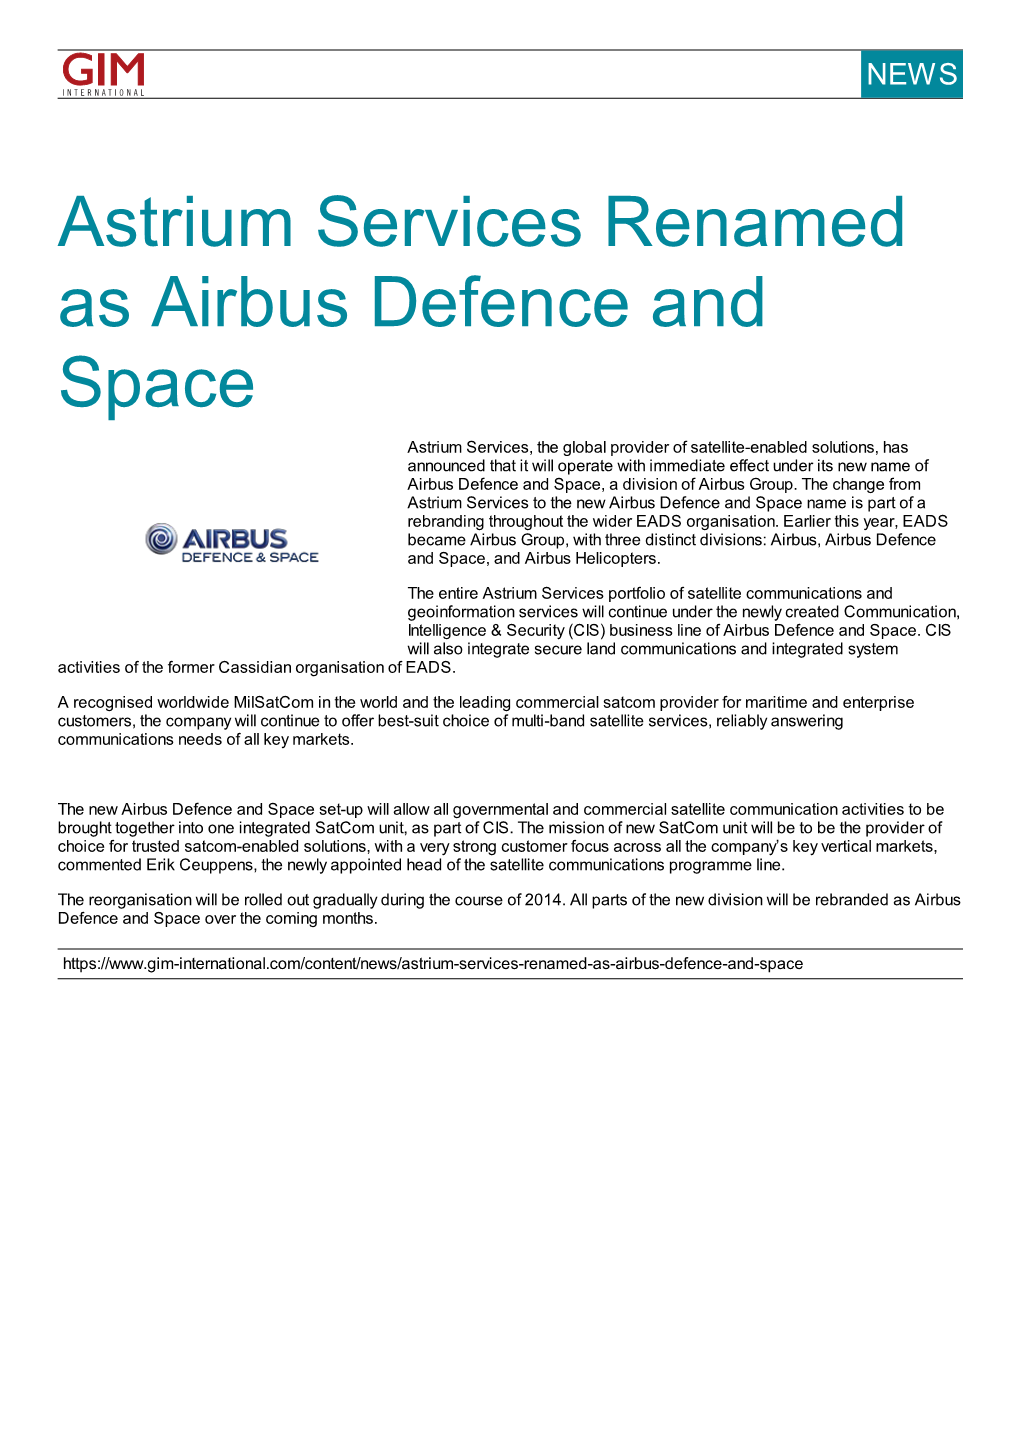 Astrium Services Renamed As Airbus Defence and Space